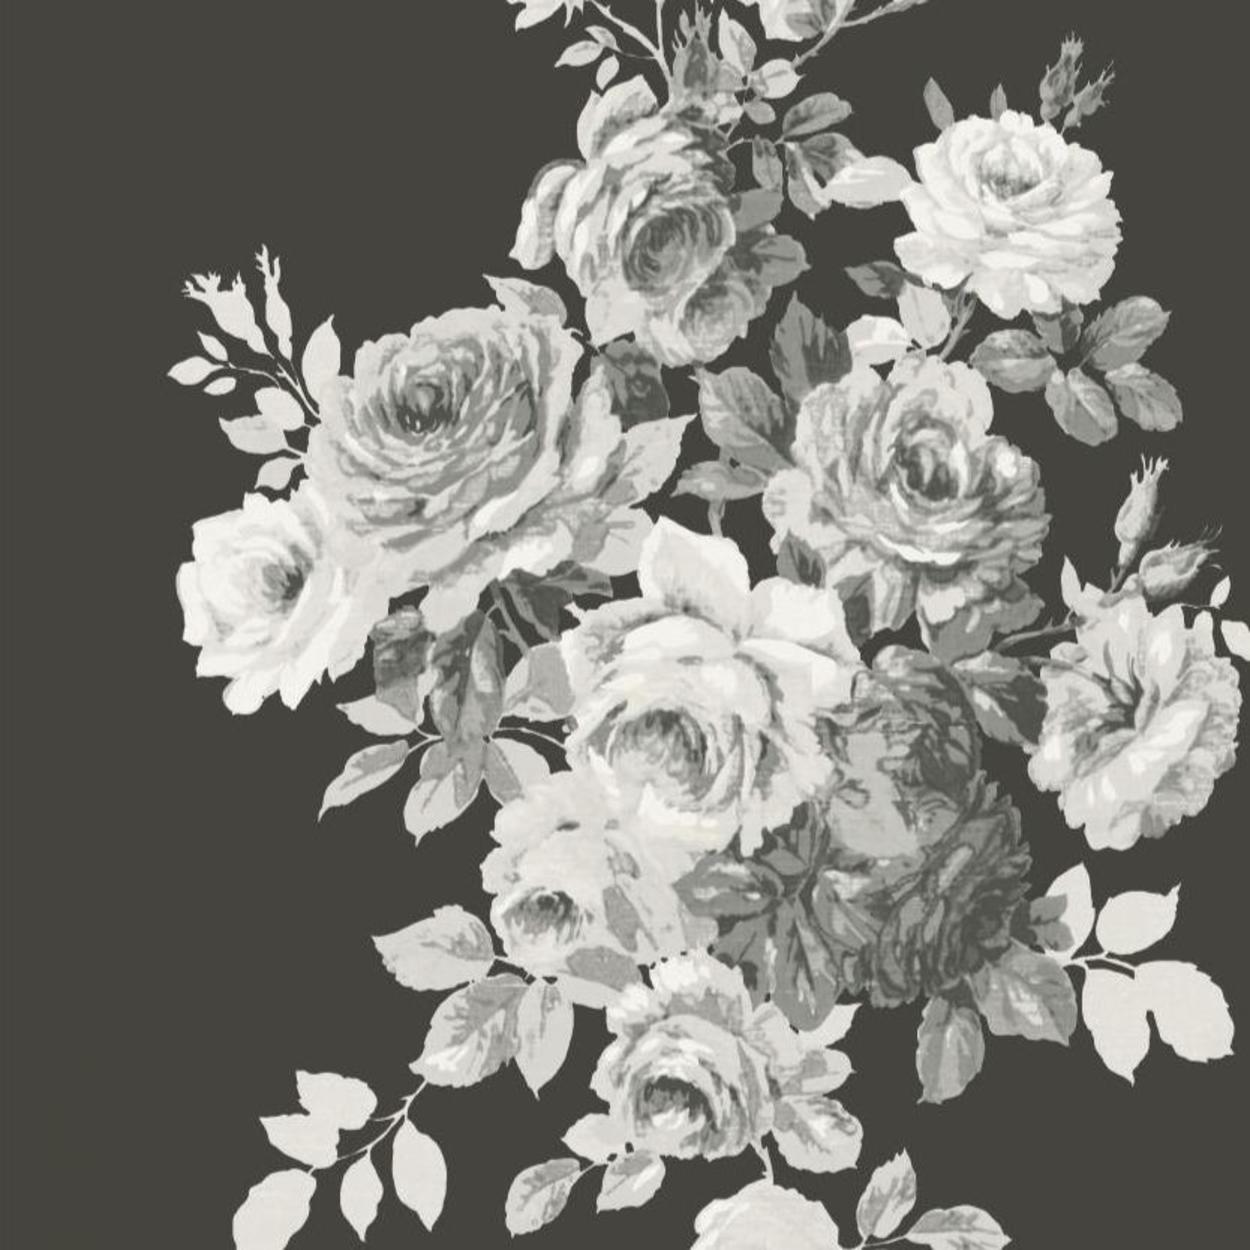 black and white rose background